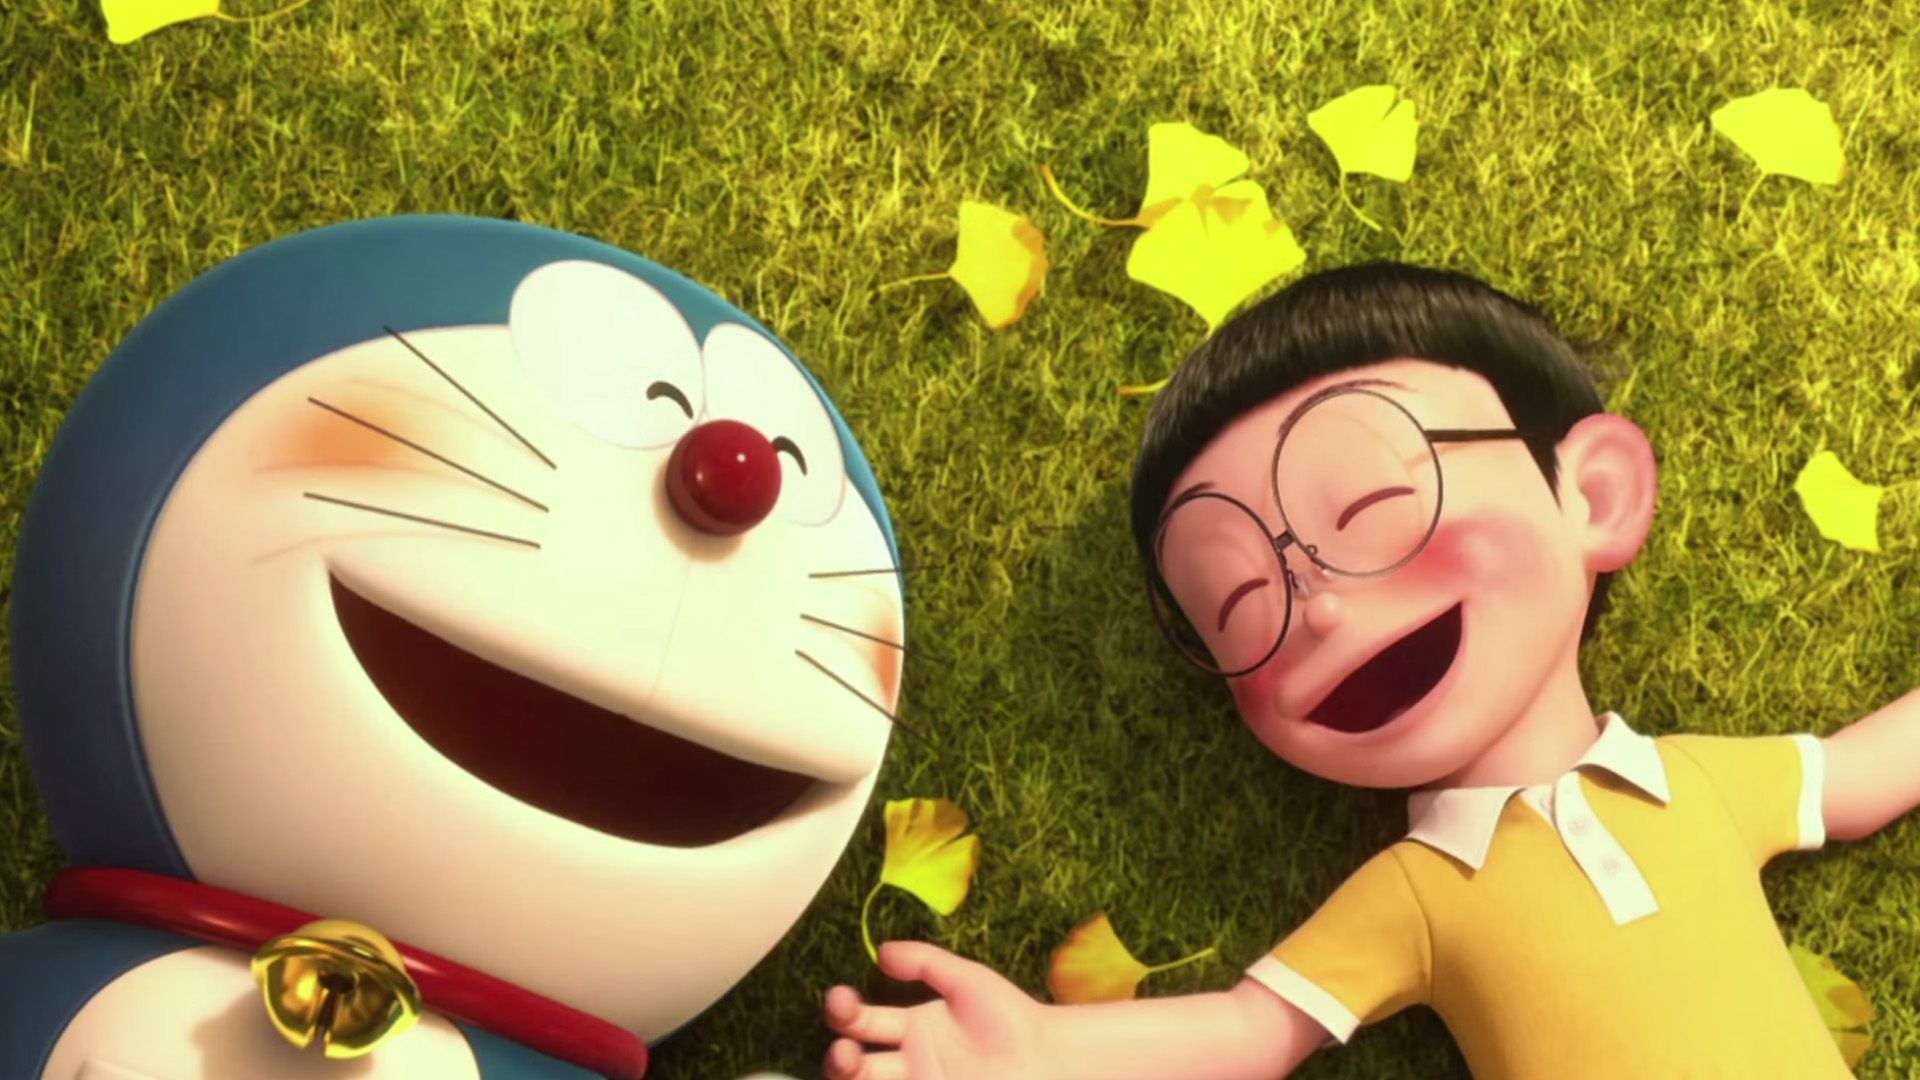 Stand By Me Doraemon And Nobita Friendship Movie HD Wallpaper